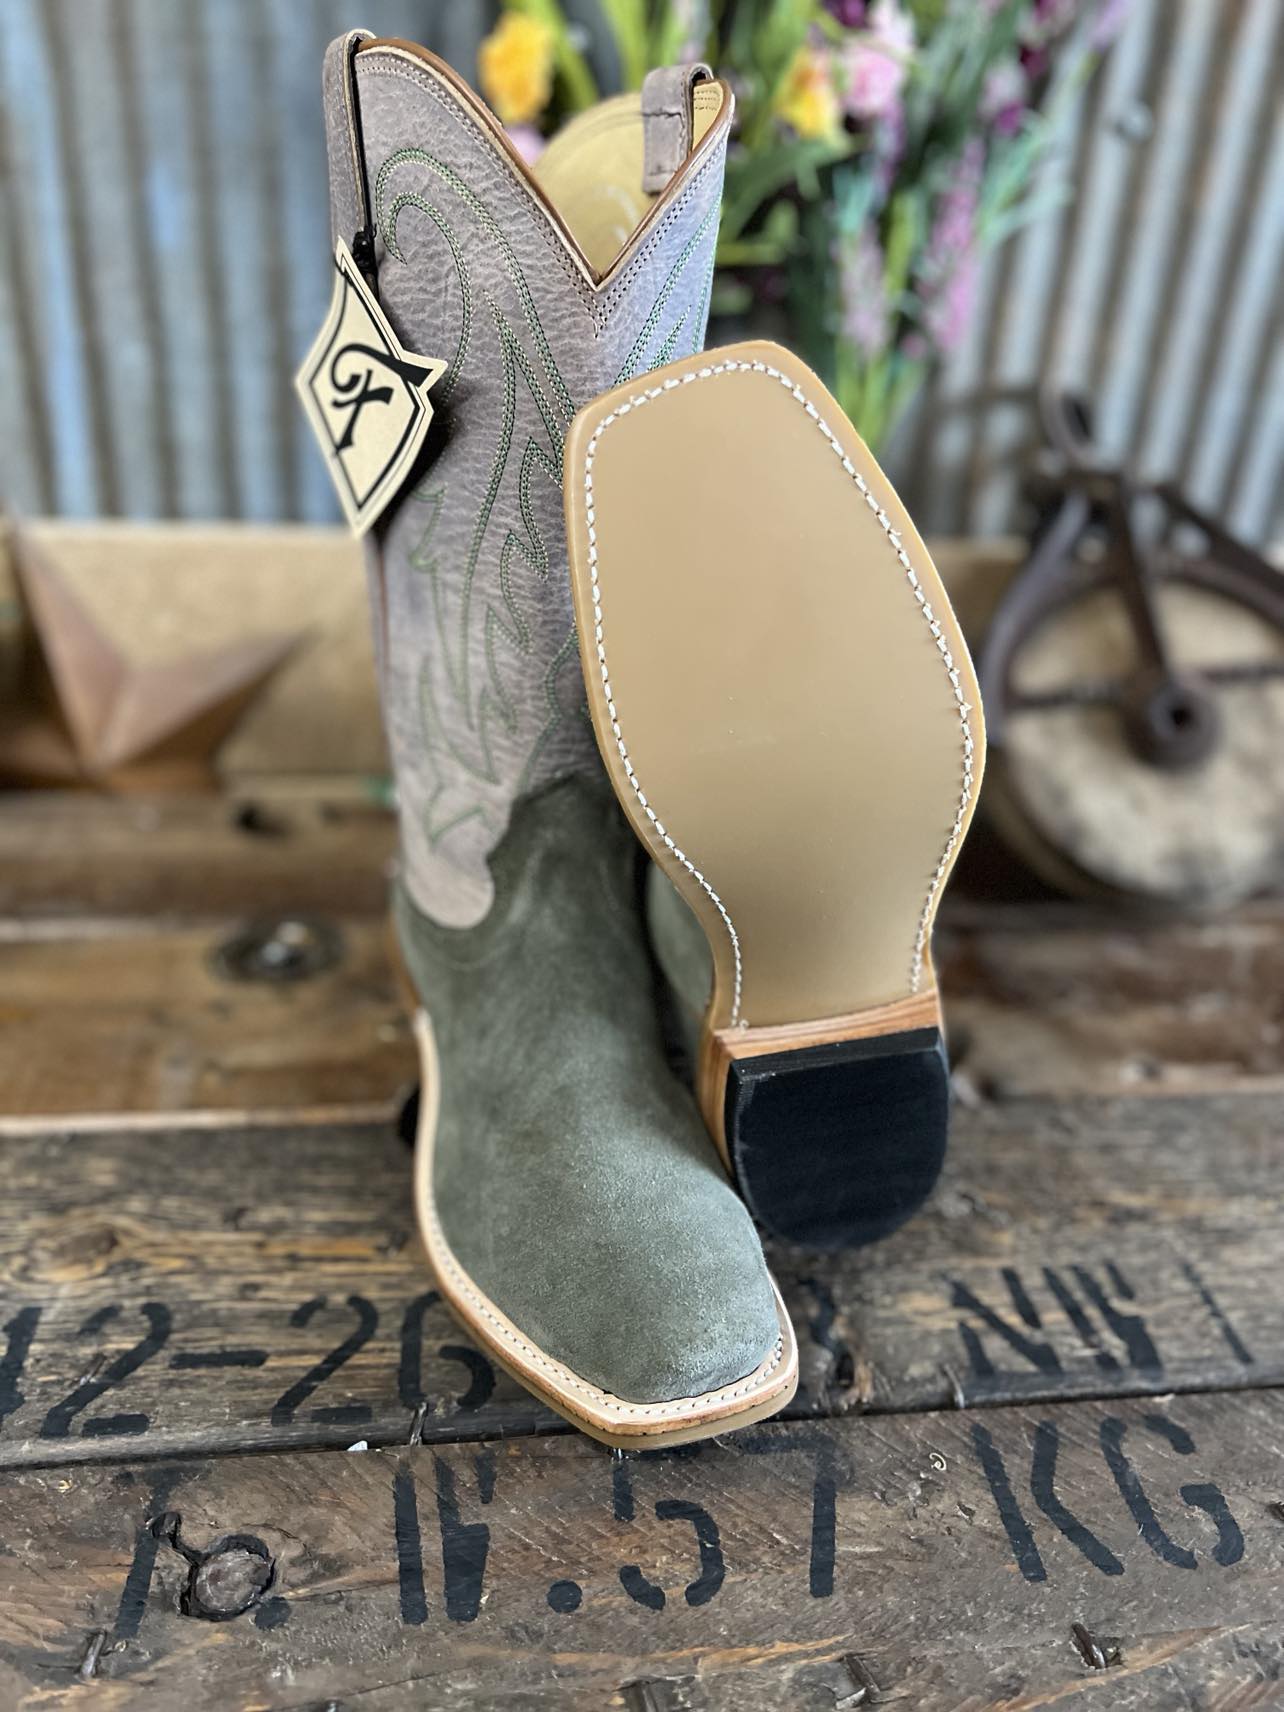 Mens Fenoglio Olive Rough Out Boots-Men's Boots-Fenoglio Boots-Lucky J Boots & More, Women's, Men's, & Kids Western Store Located in Carthage, MO